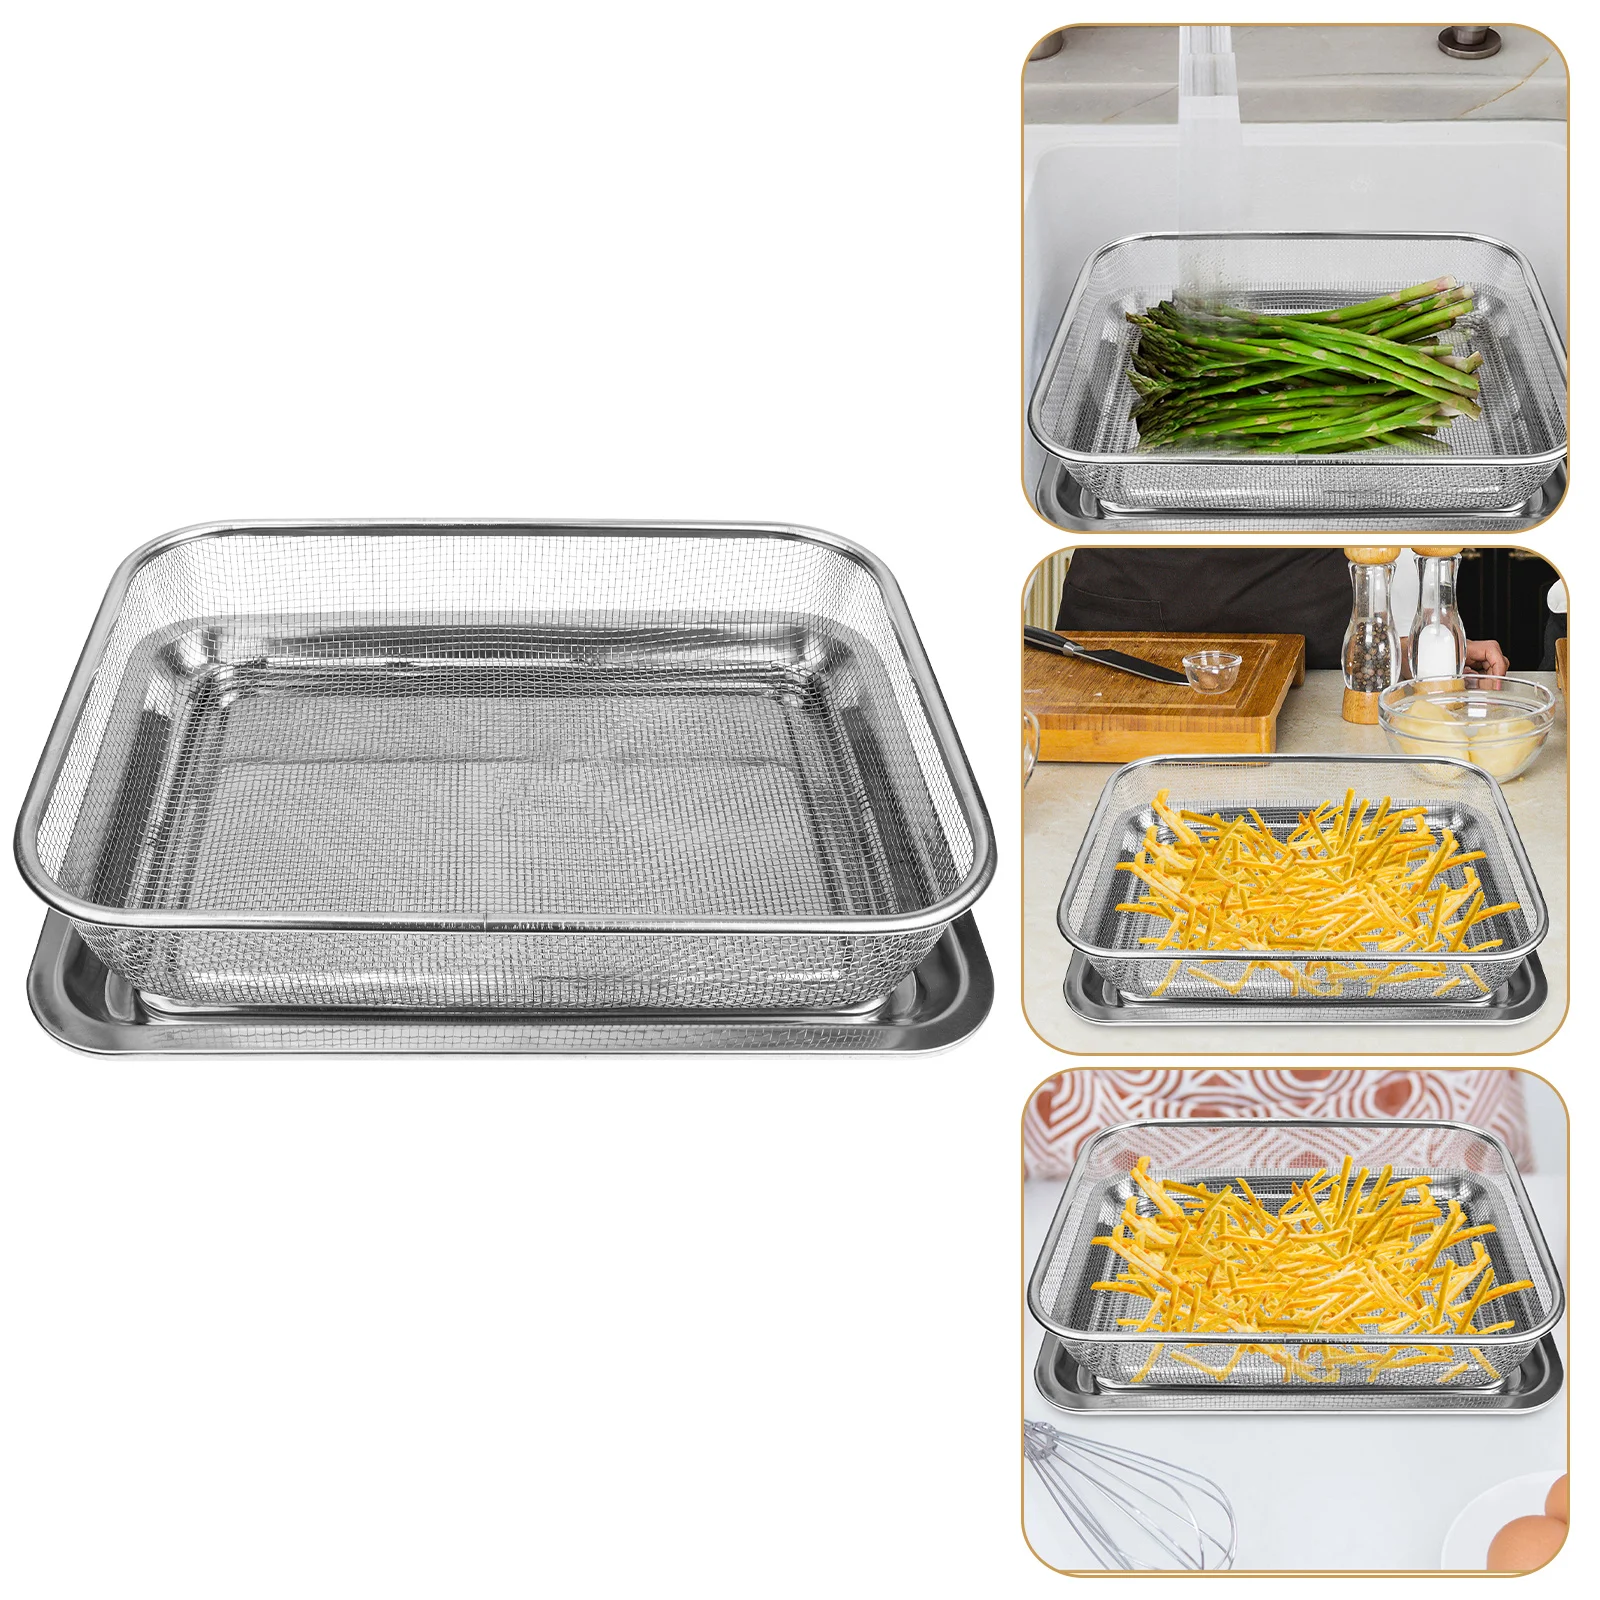 

Frying Basket Crisper Tray Oven Grease Catcher Containers Cookies Air Sheet Stainless Steel Deep Fryer Crisping